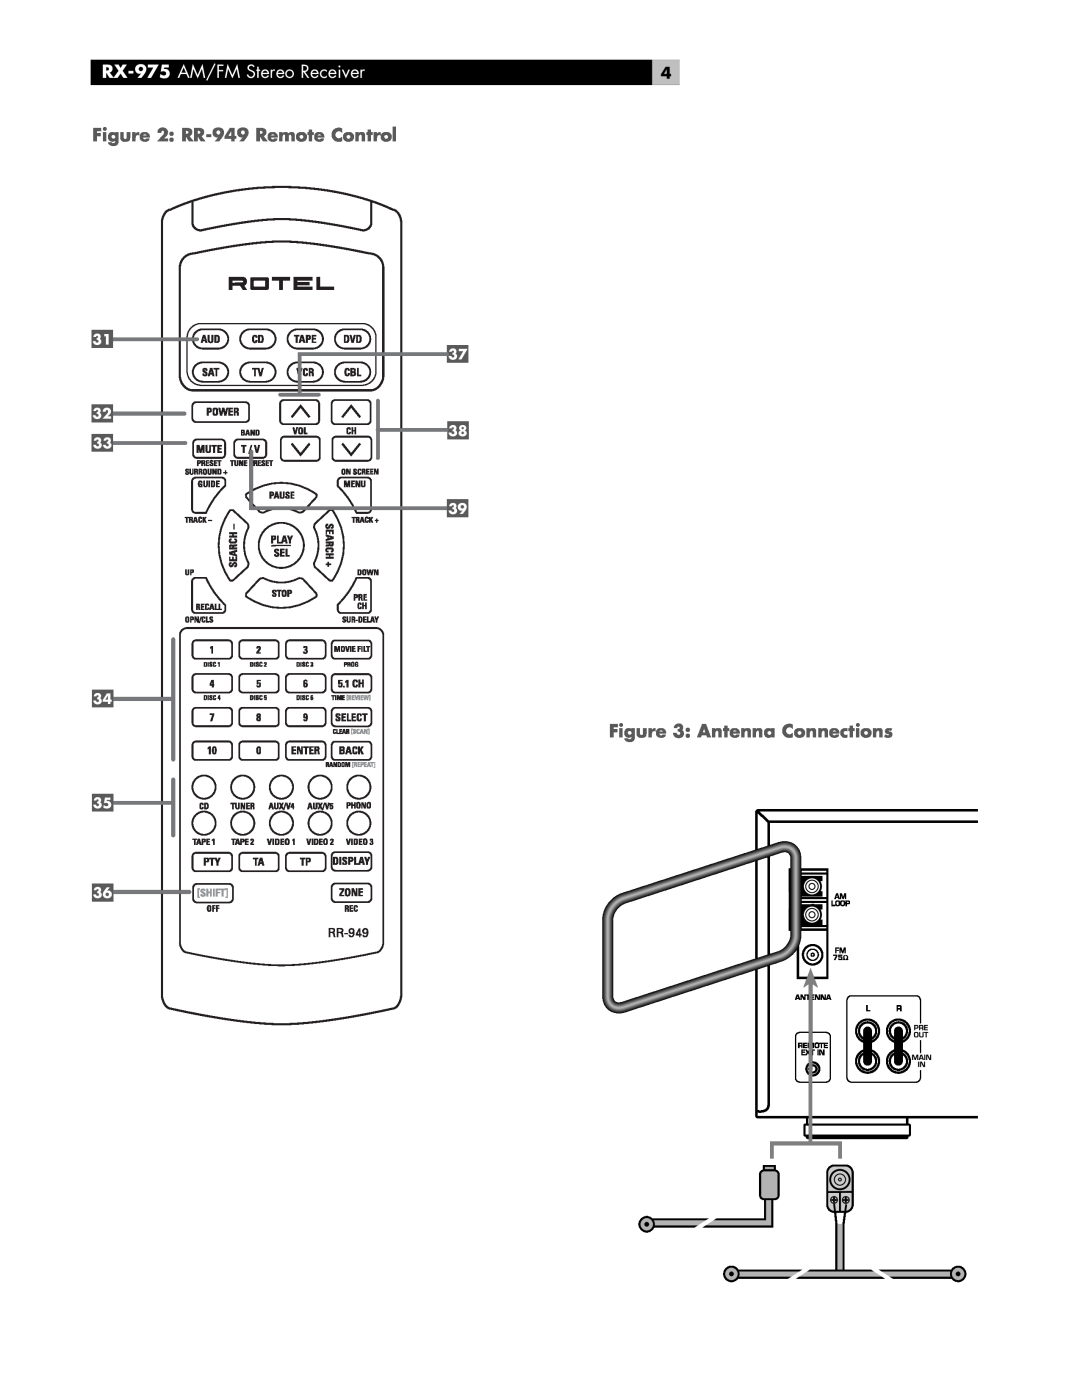 Rotel owner manual RX-975 AM/FM Stereo Receiver, RR-949Remote Control, Antenna Connections 